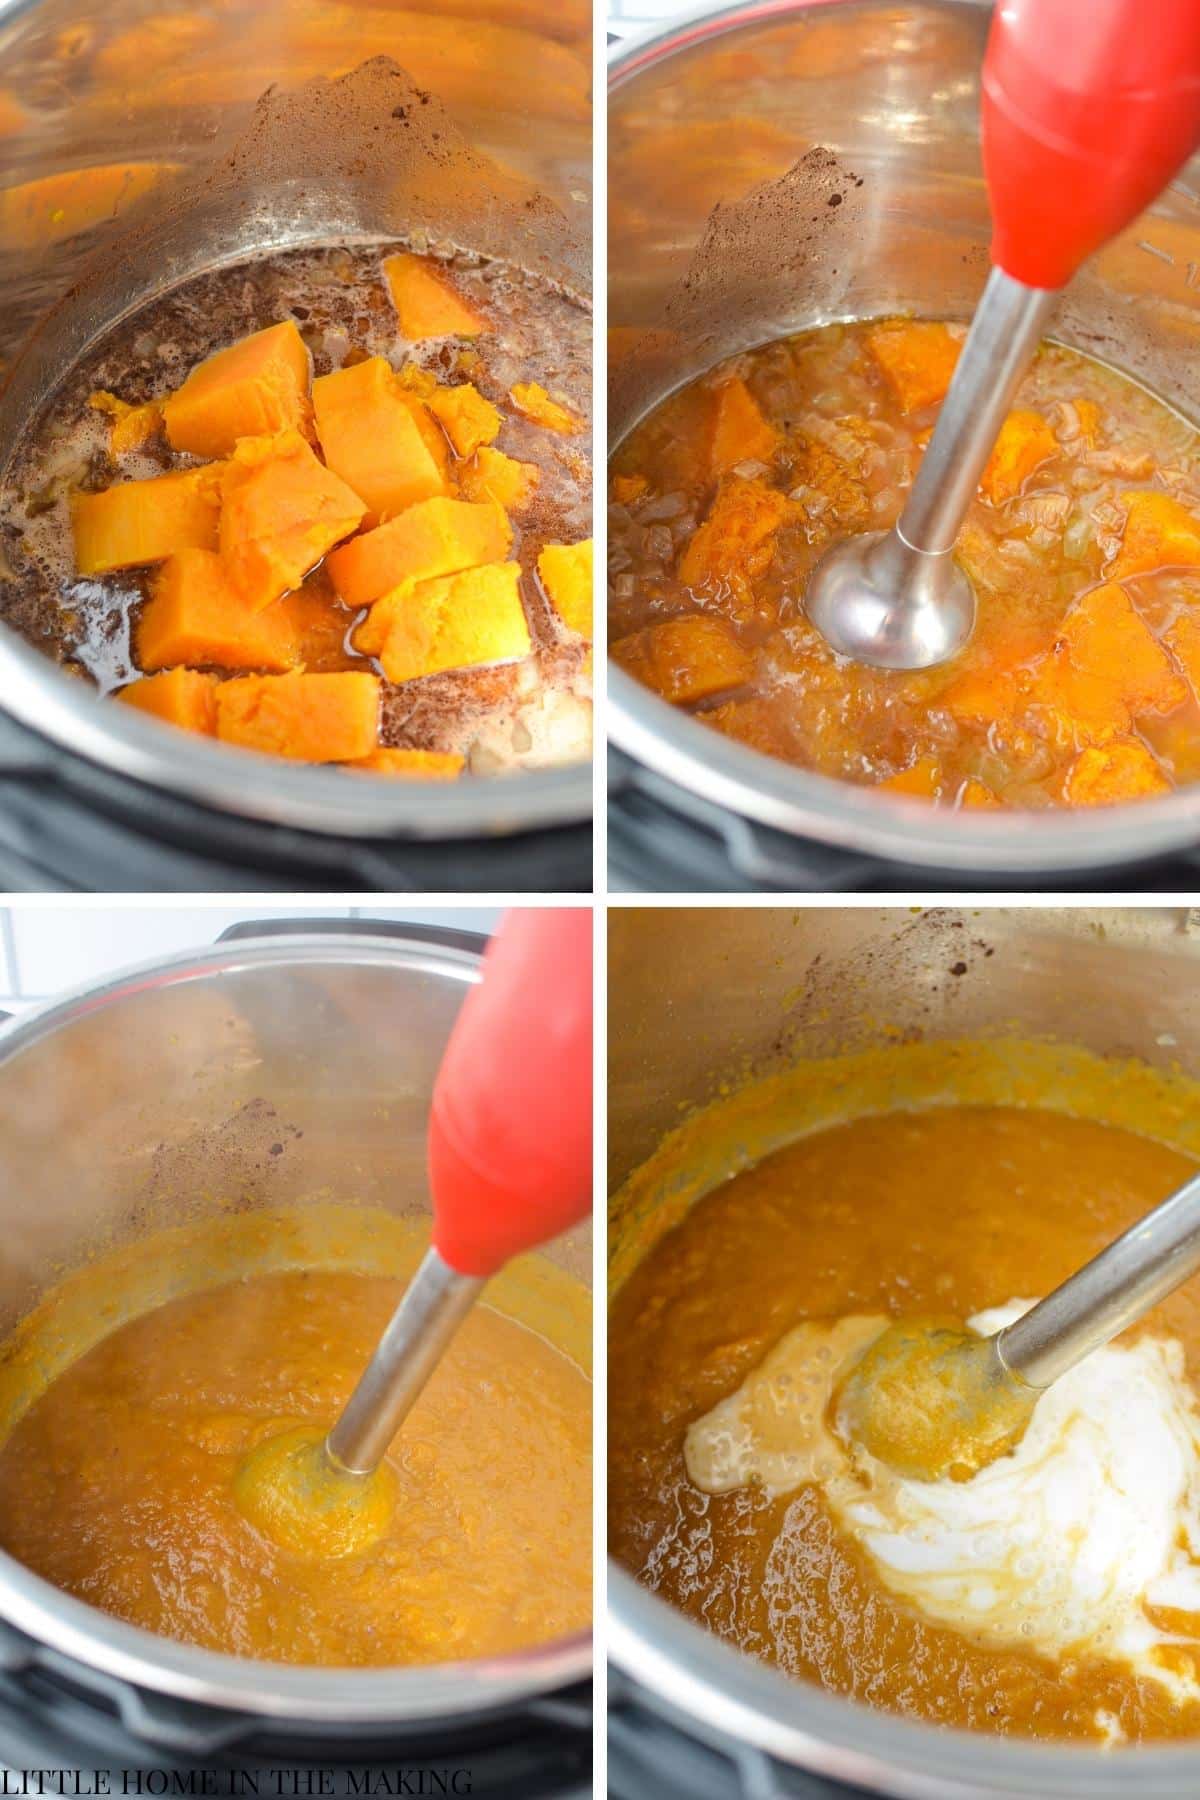 Pureeing cooked butternut squash into a soup using a handheld blender.